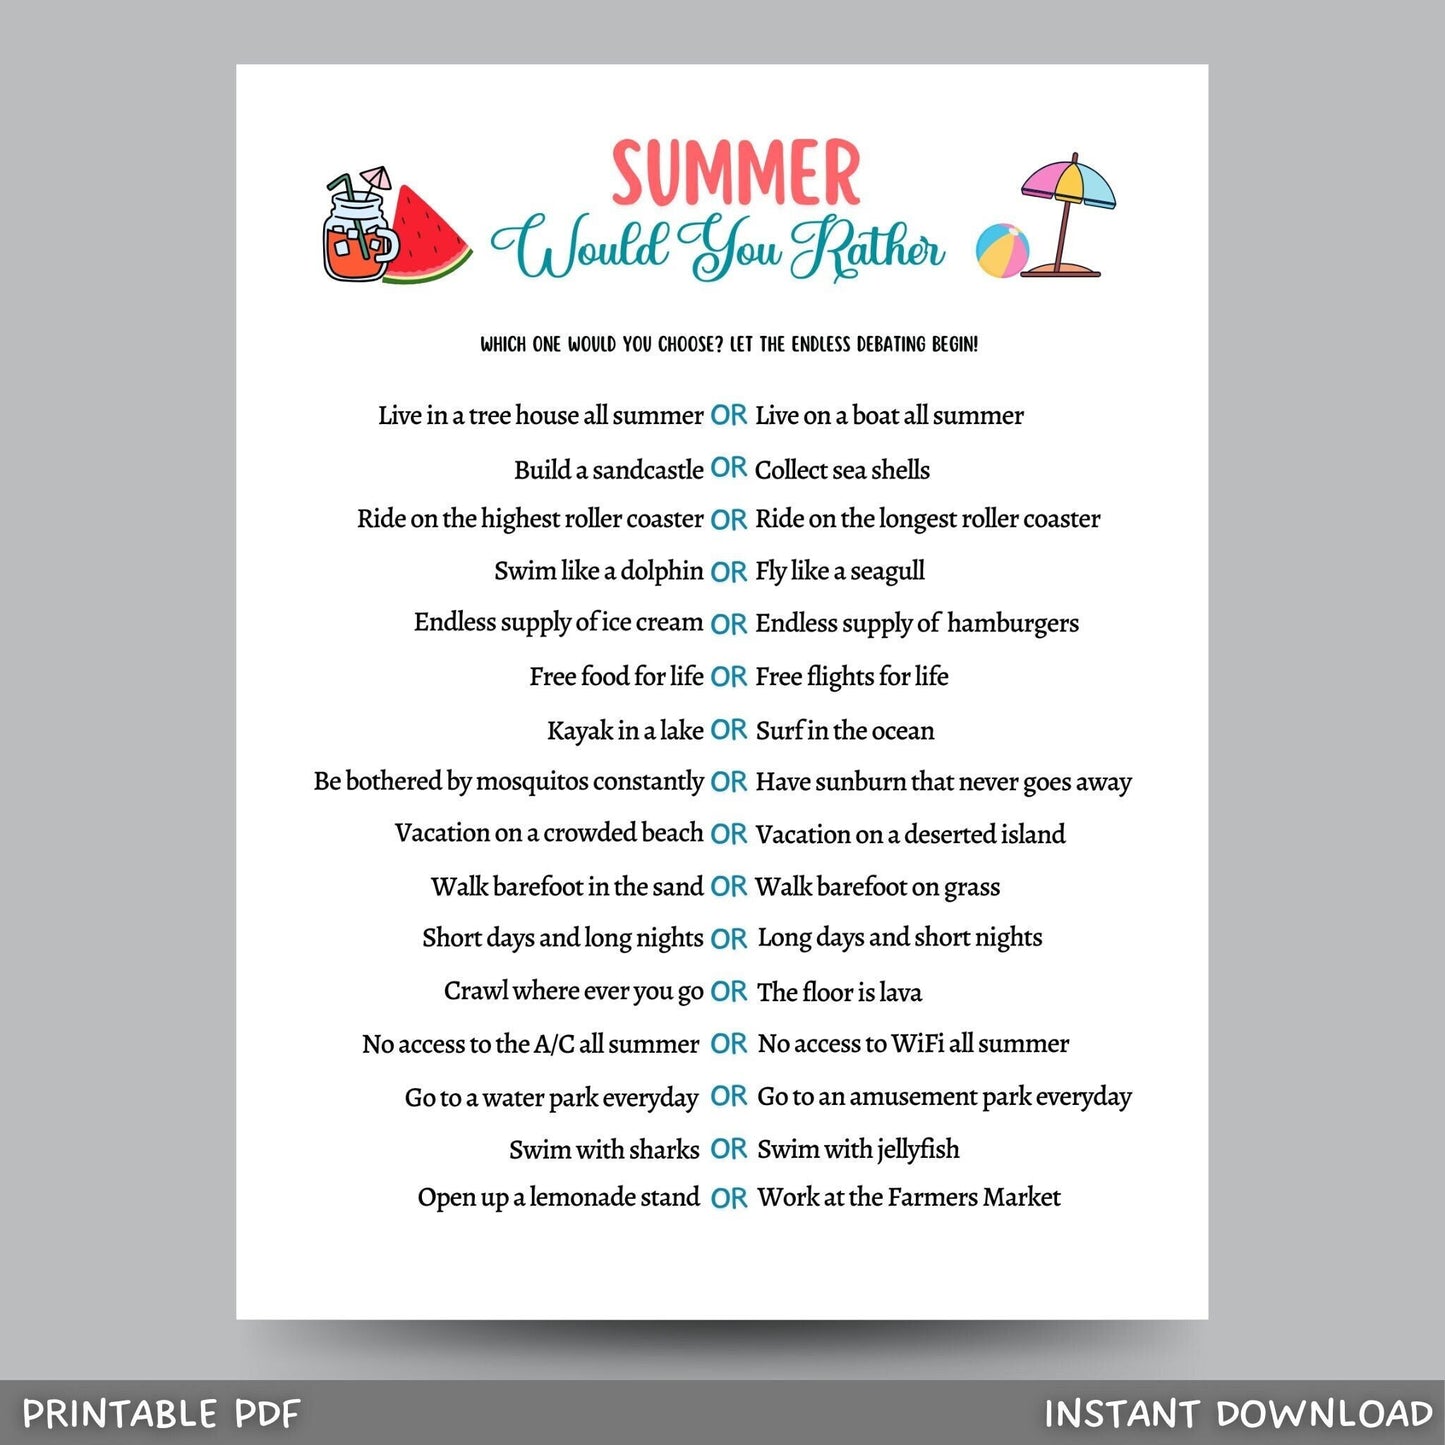 Summer Would You Rather Game Printable, Summer Camp Activity, Beach Pool Party This Or That Game, Icebreaker for Kids, Fun Vacation Ideas